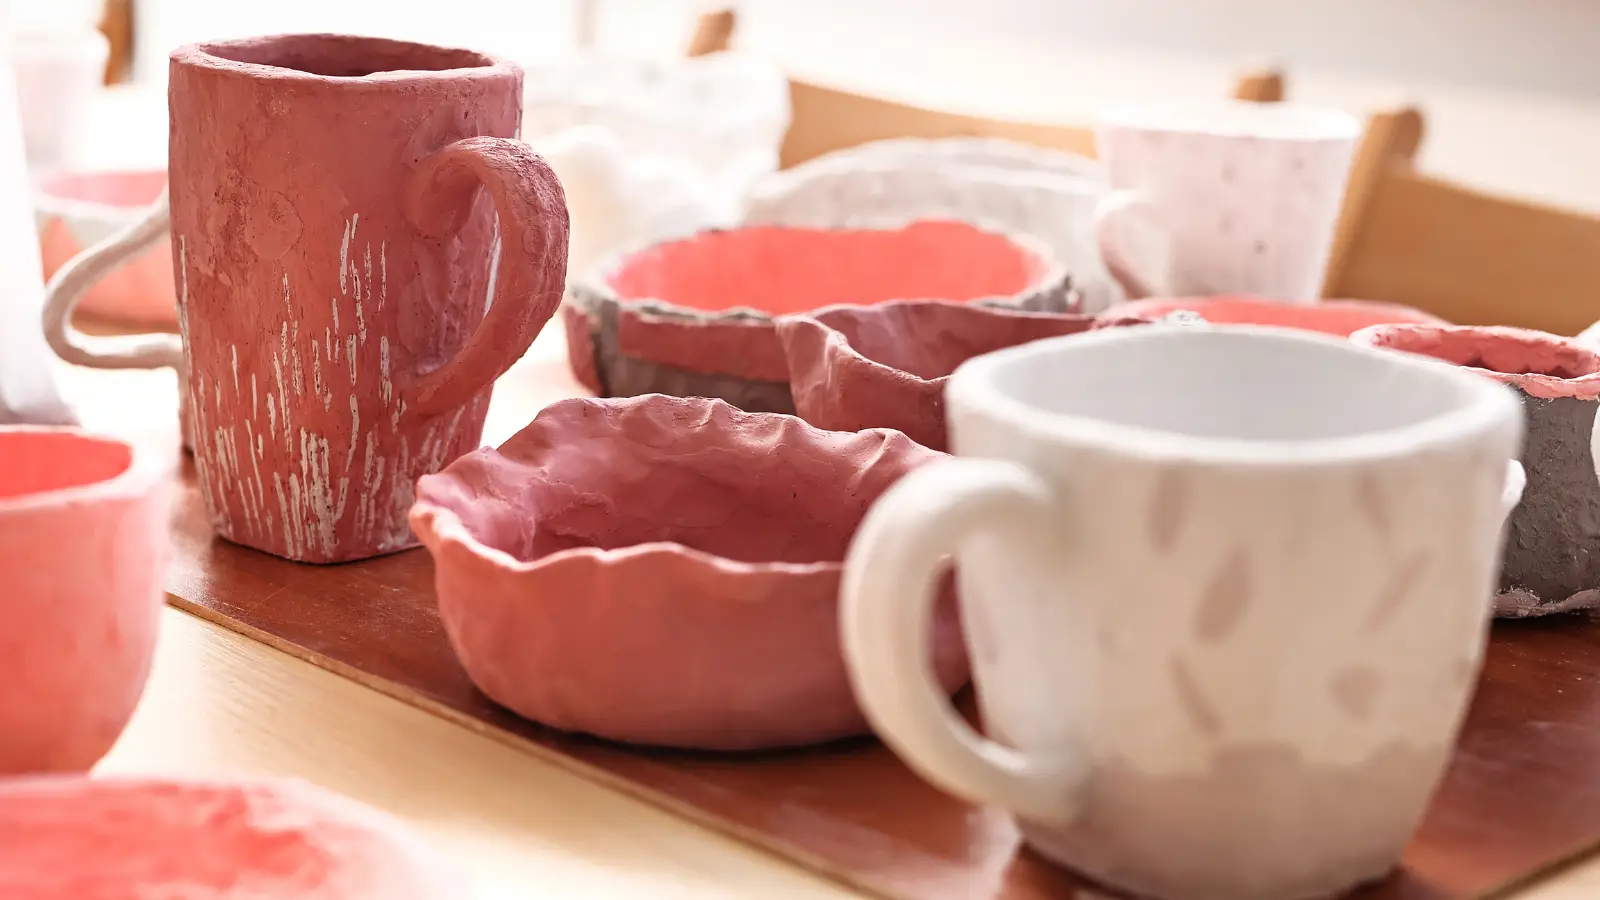 Hand made ceramic mugs and pinch pots glazed in warm reds, oranges and white sit on a wooden table.